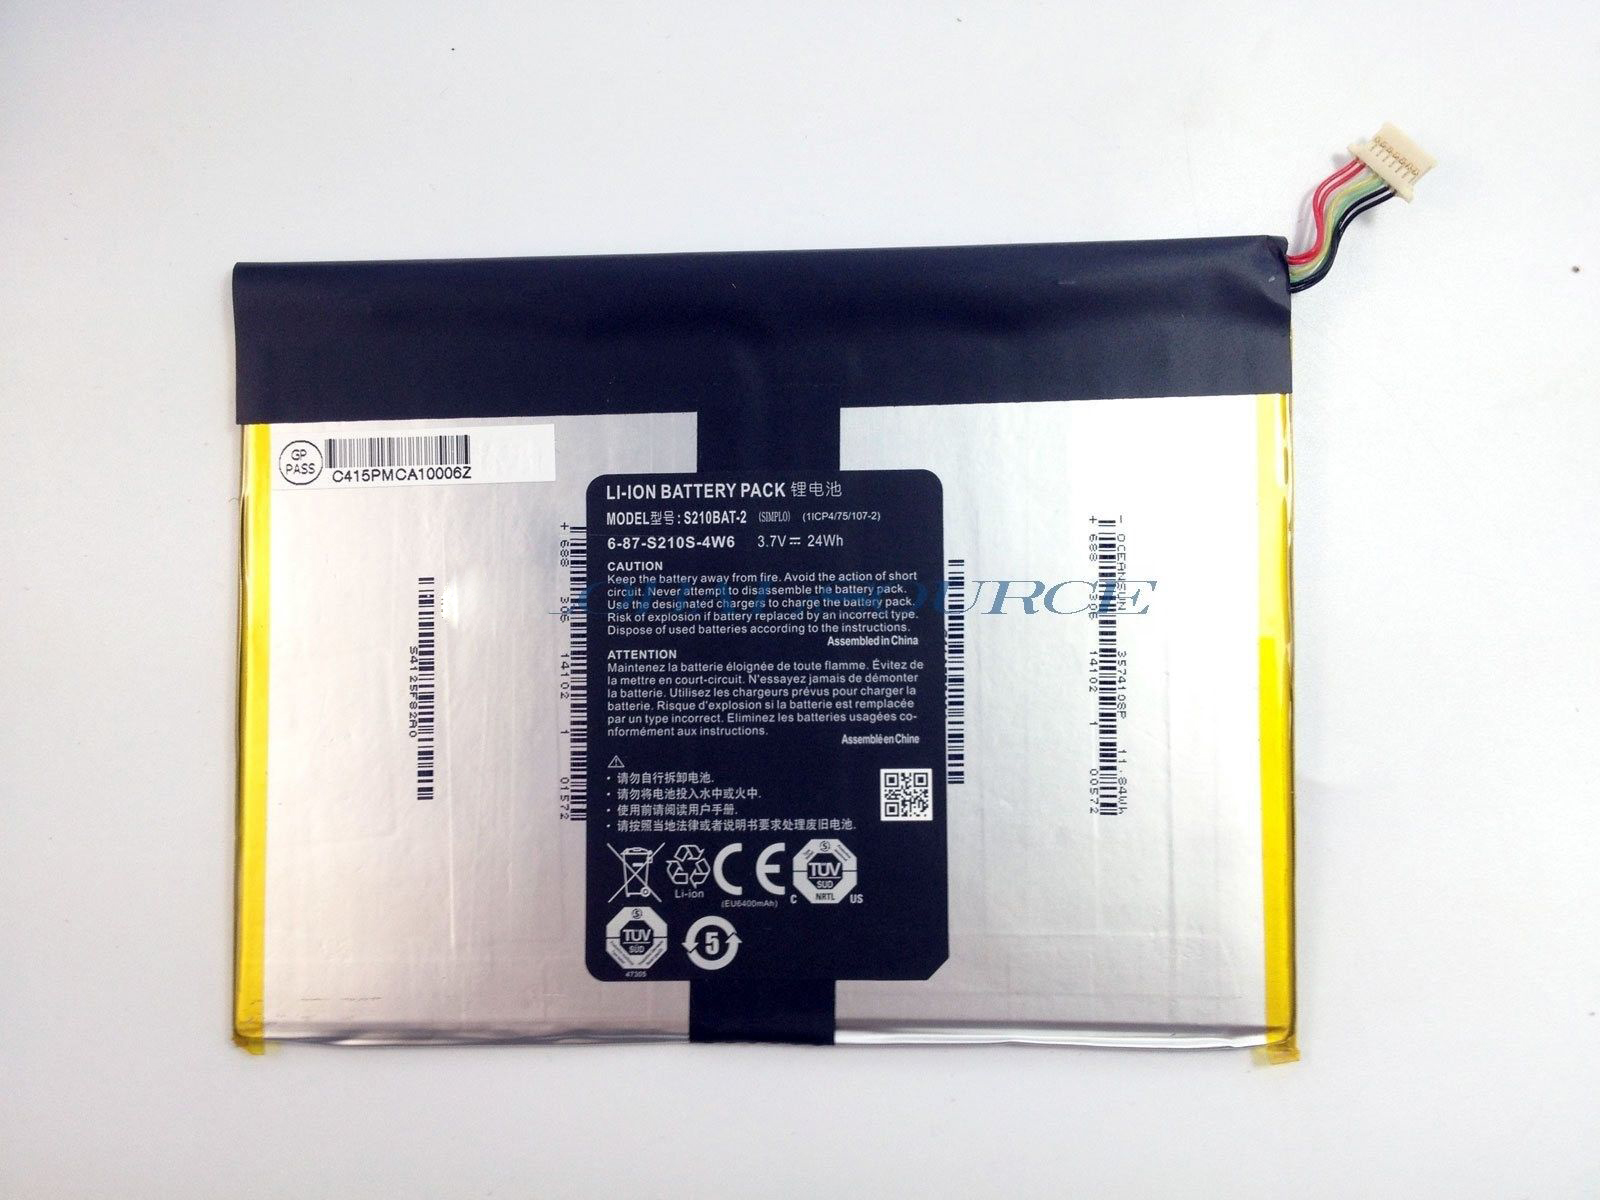 Clevo 6 87 S210s Xxxx Laptop Battery For S210tu L High Quality Clevo 6 87 S210s Xxxx Laptop Battery